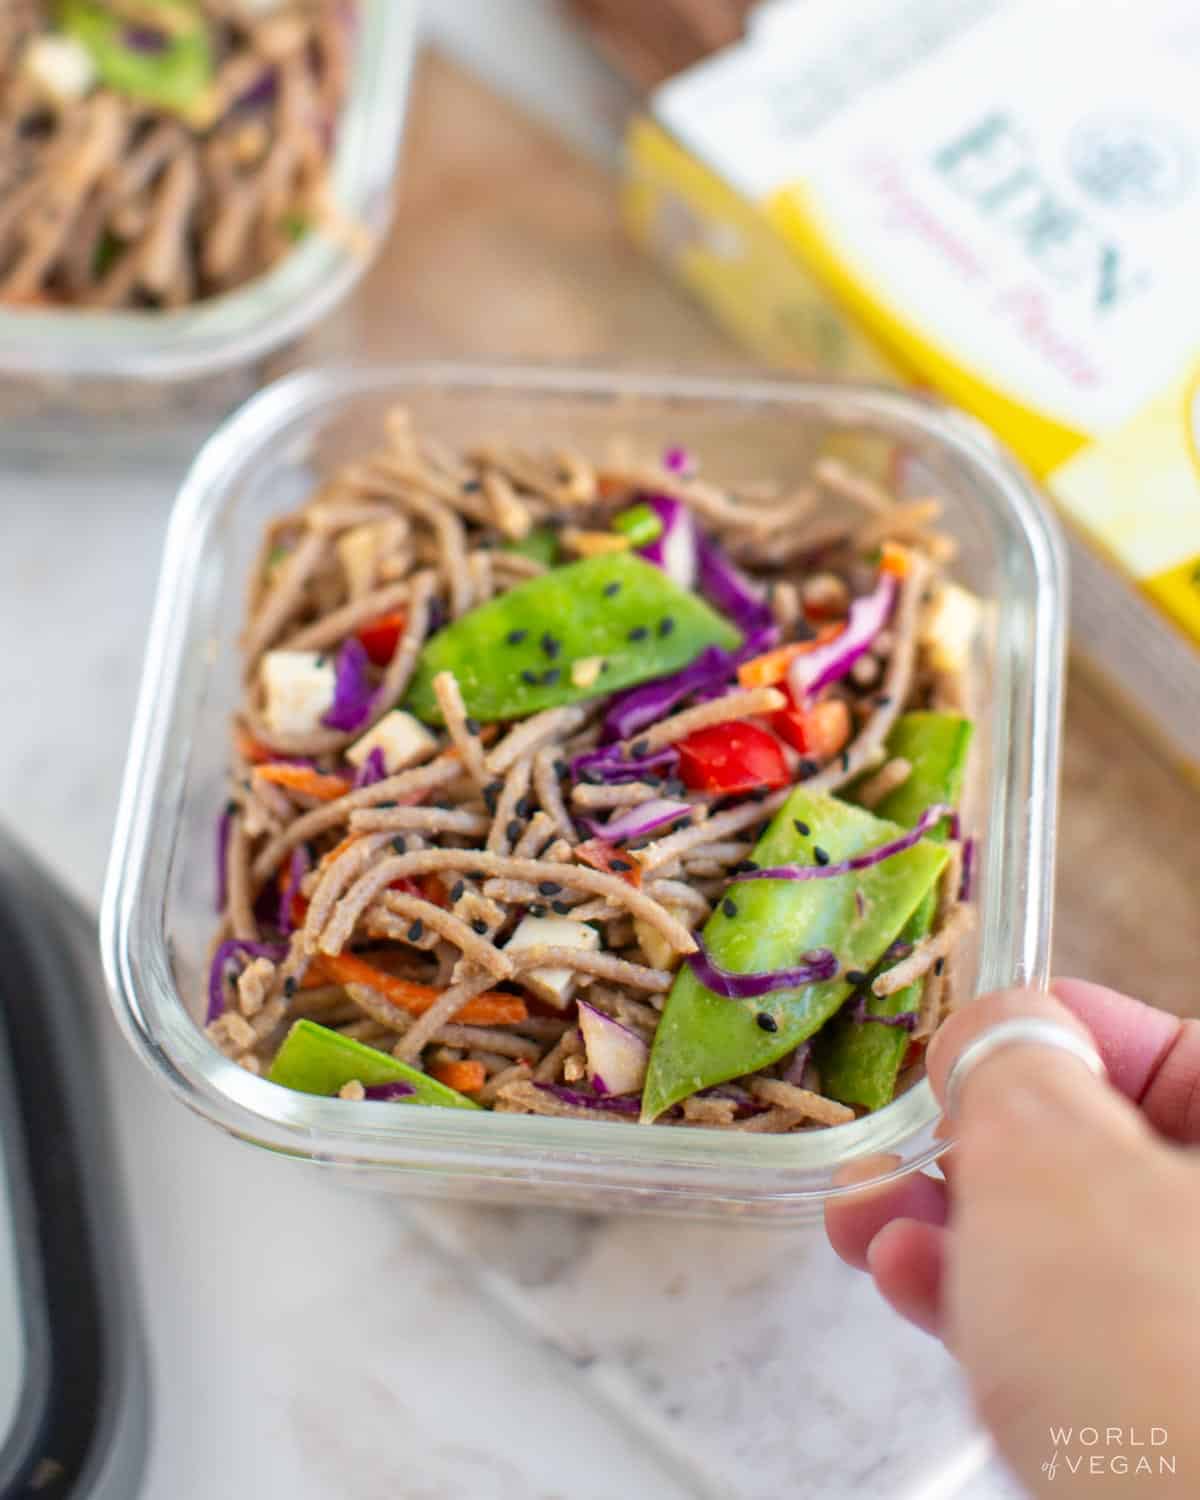 Cold noodle salad in a meal prep container.